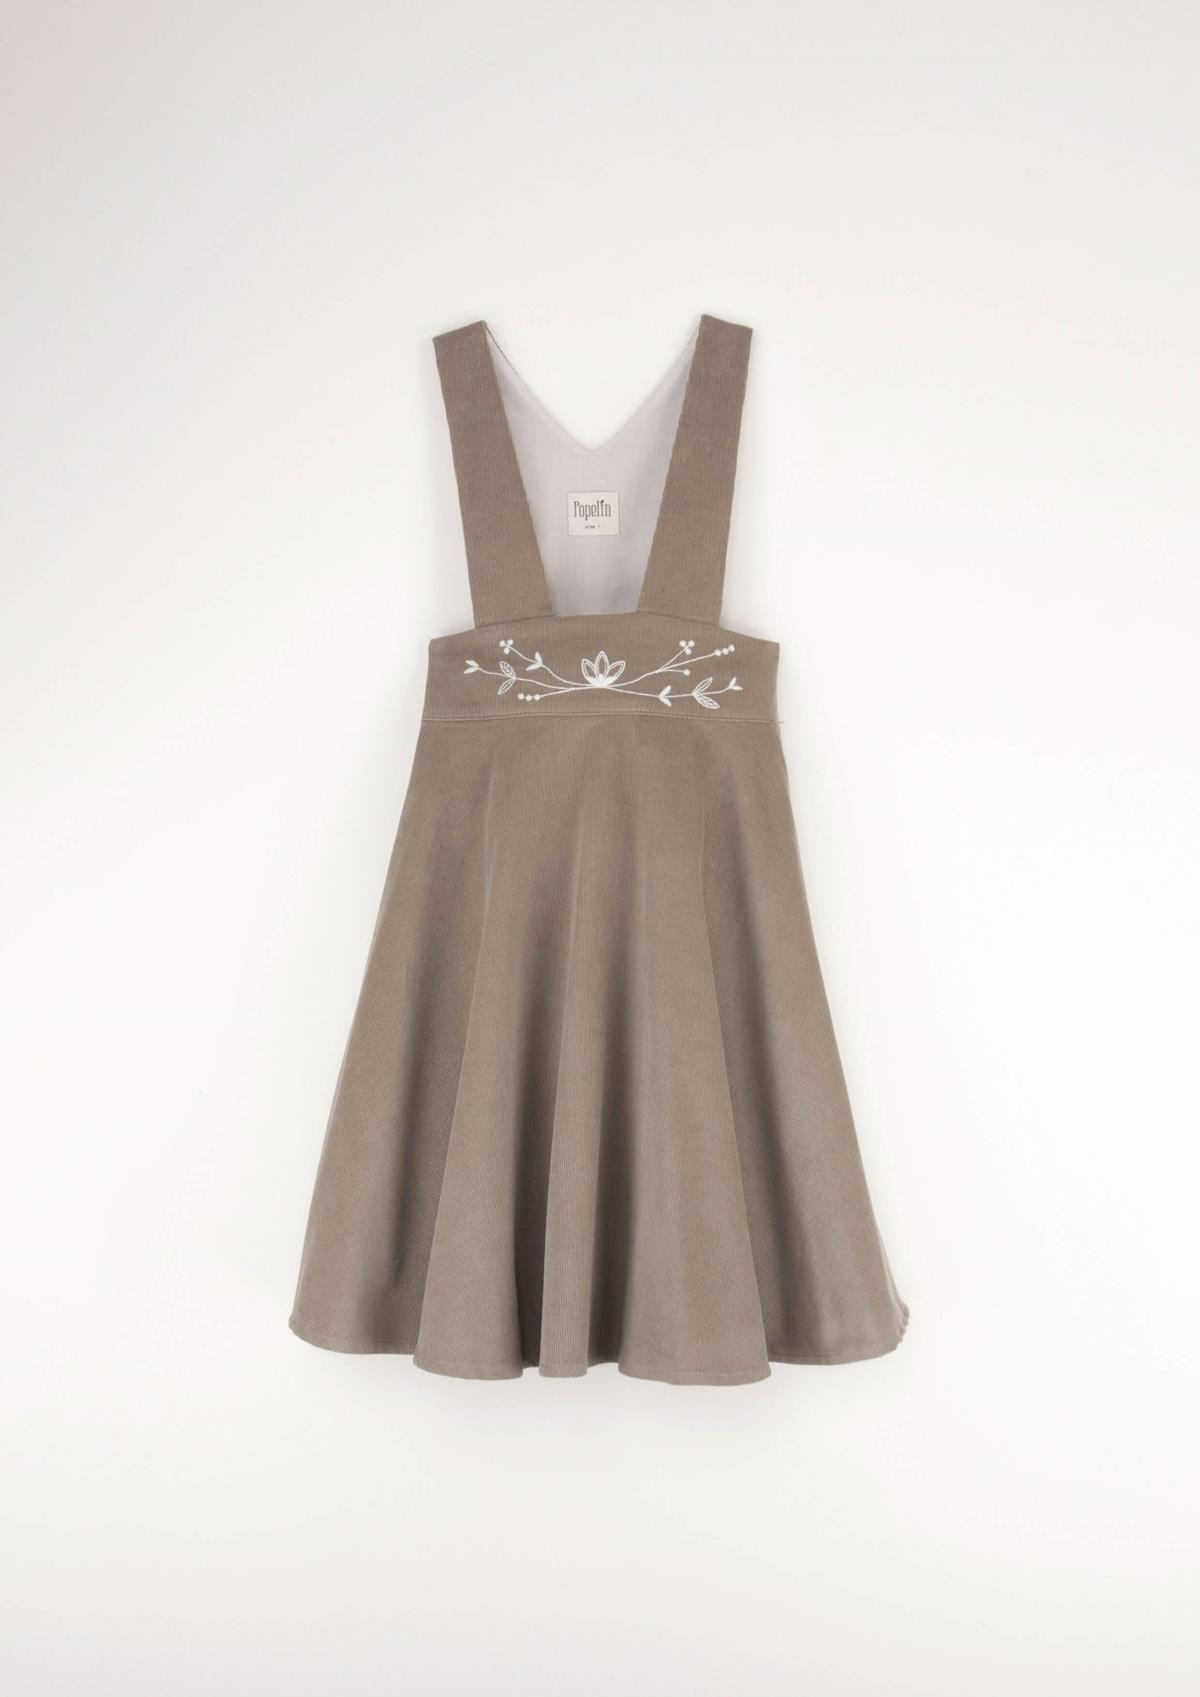 Mod.36.3 Taupe dungaree dress with embroidery | AW23.24 Mod.36.3 Taupe dungaree dress with embroidery